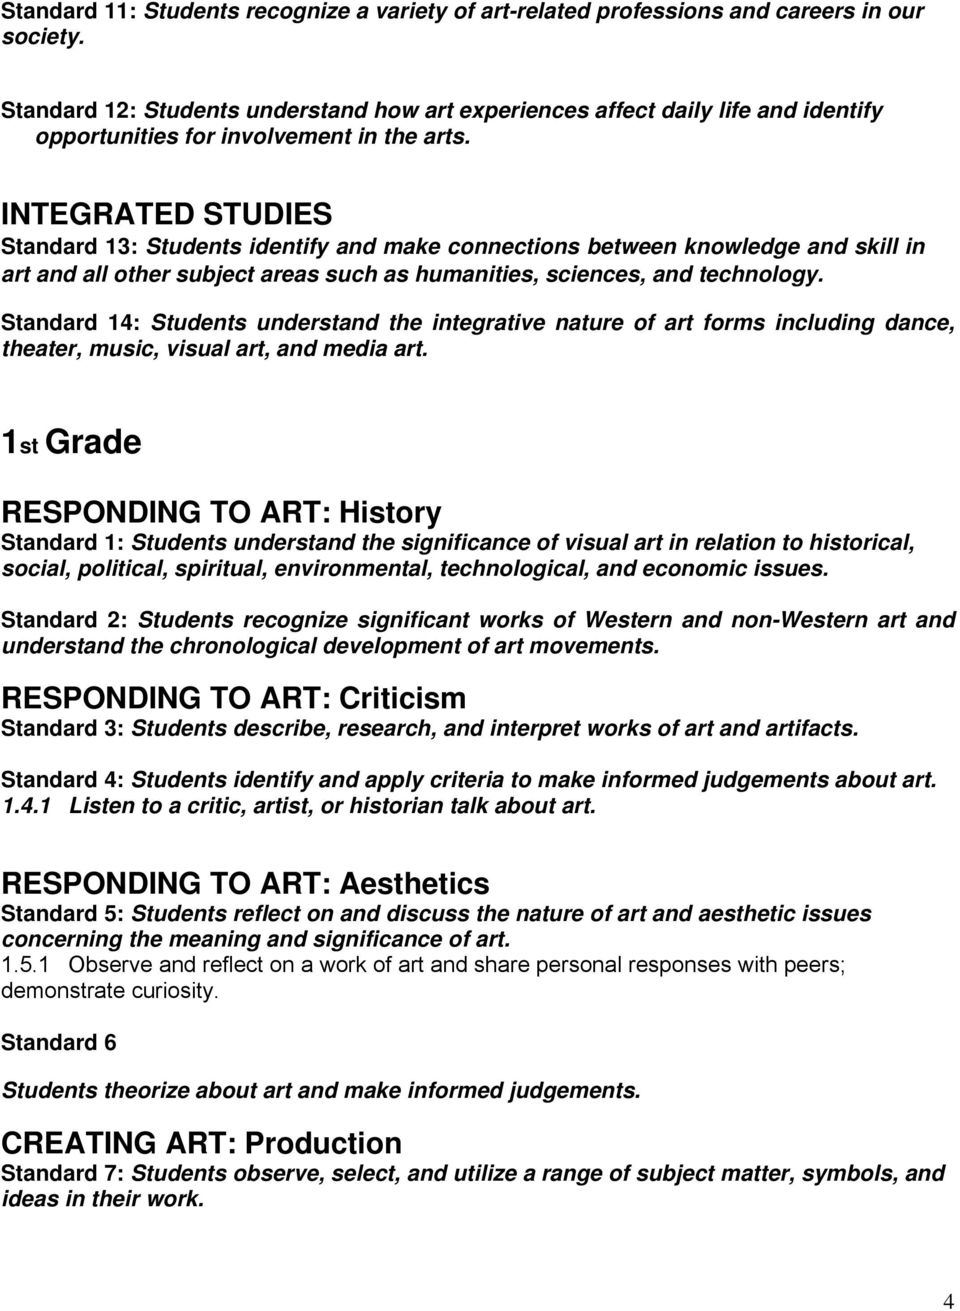 1st Grade understand the chronological development of art movements. RESPONDING TO ART: Criticism Standard 3: Students describe, research, and interpret works of art and artifacts. 1.4.